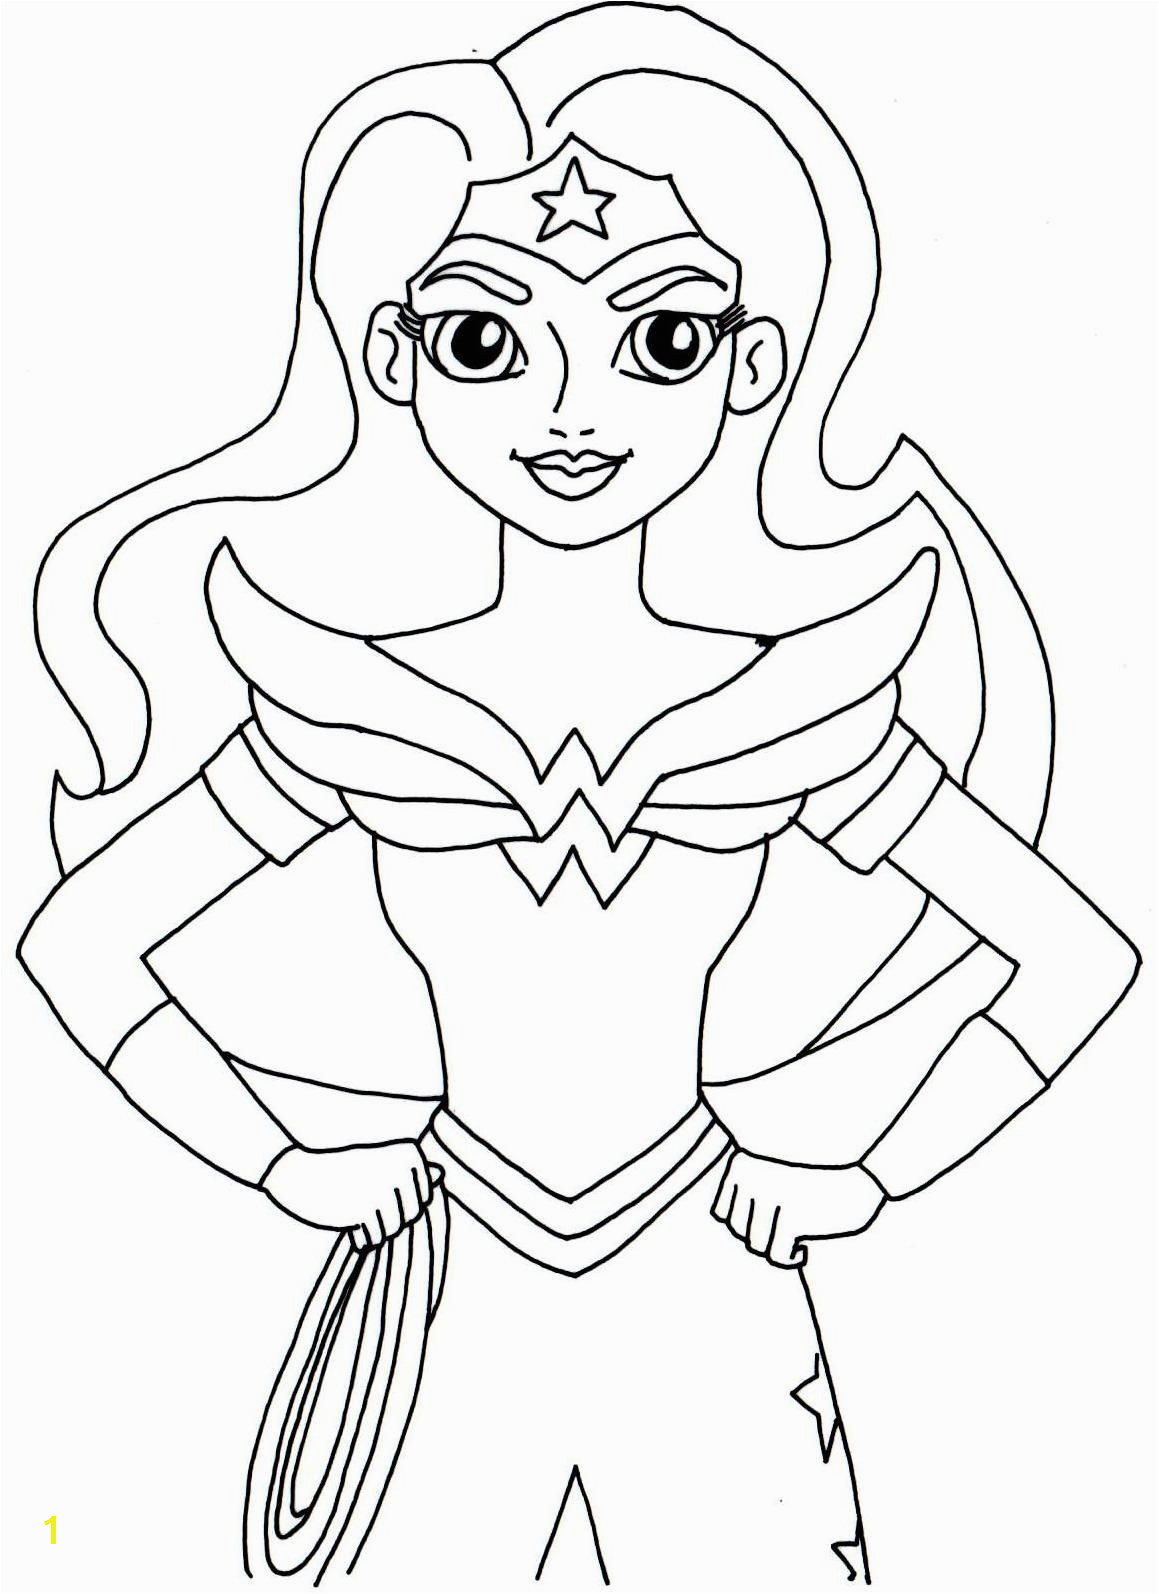 Black Women Coloring Pages Superhero Coloring Pages Gallery thephotosync